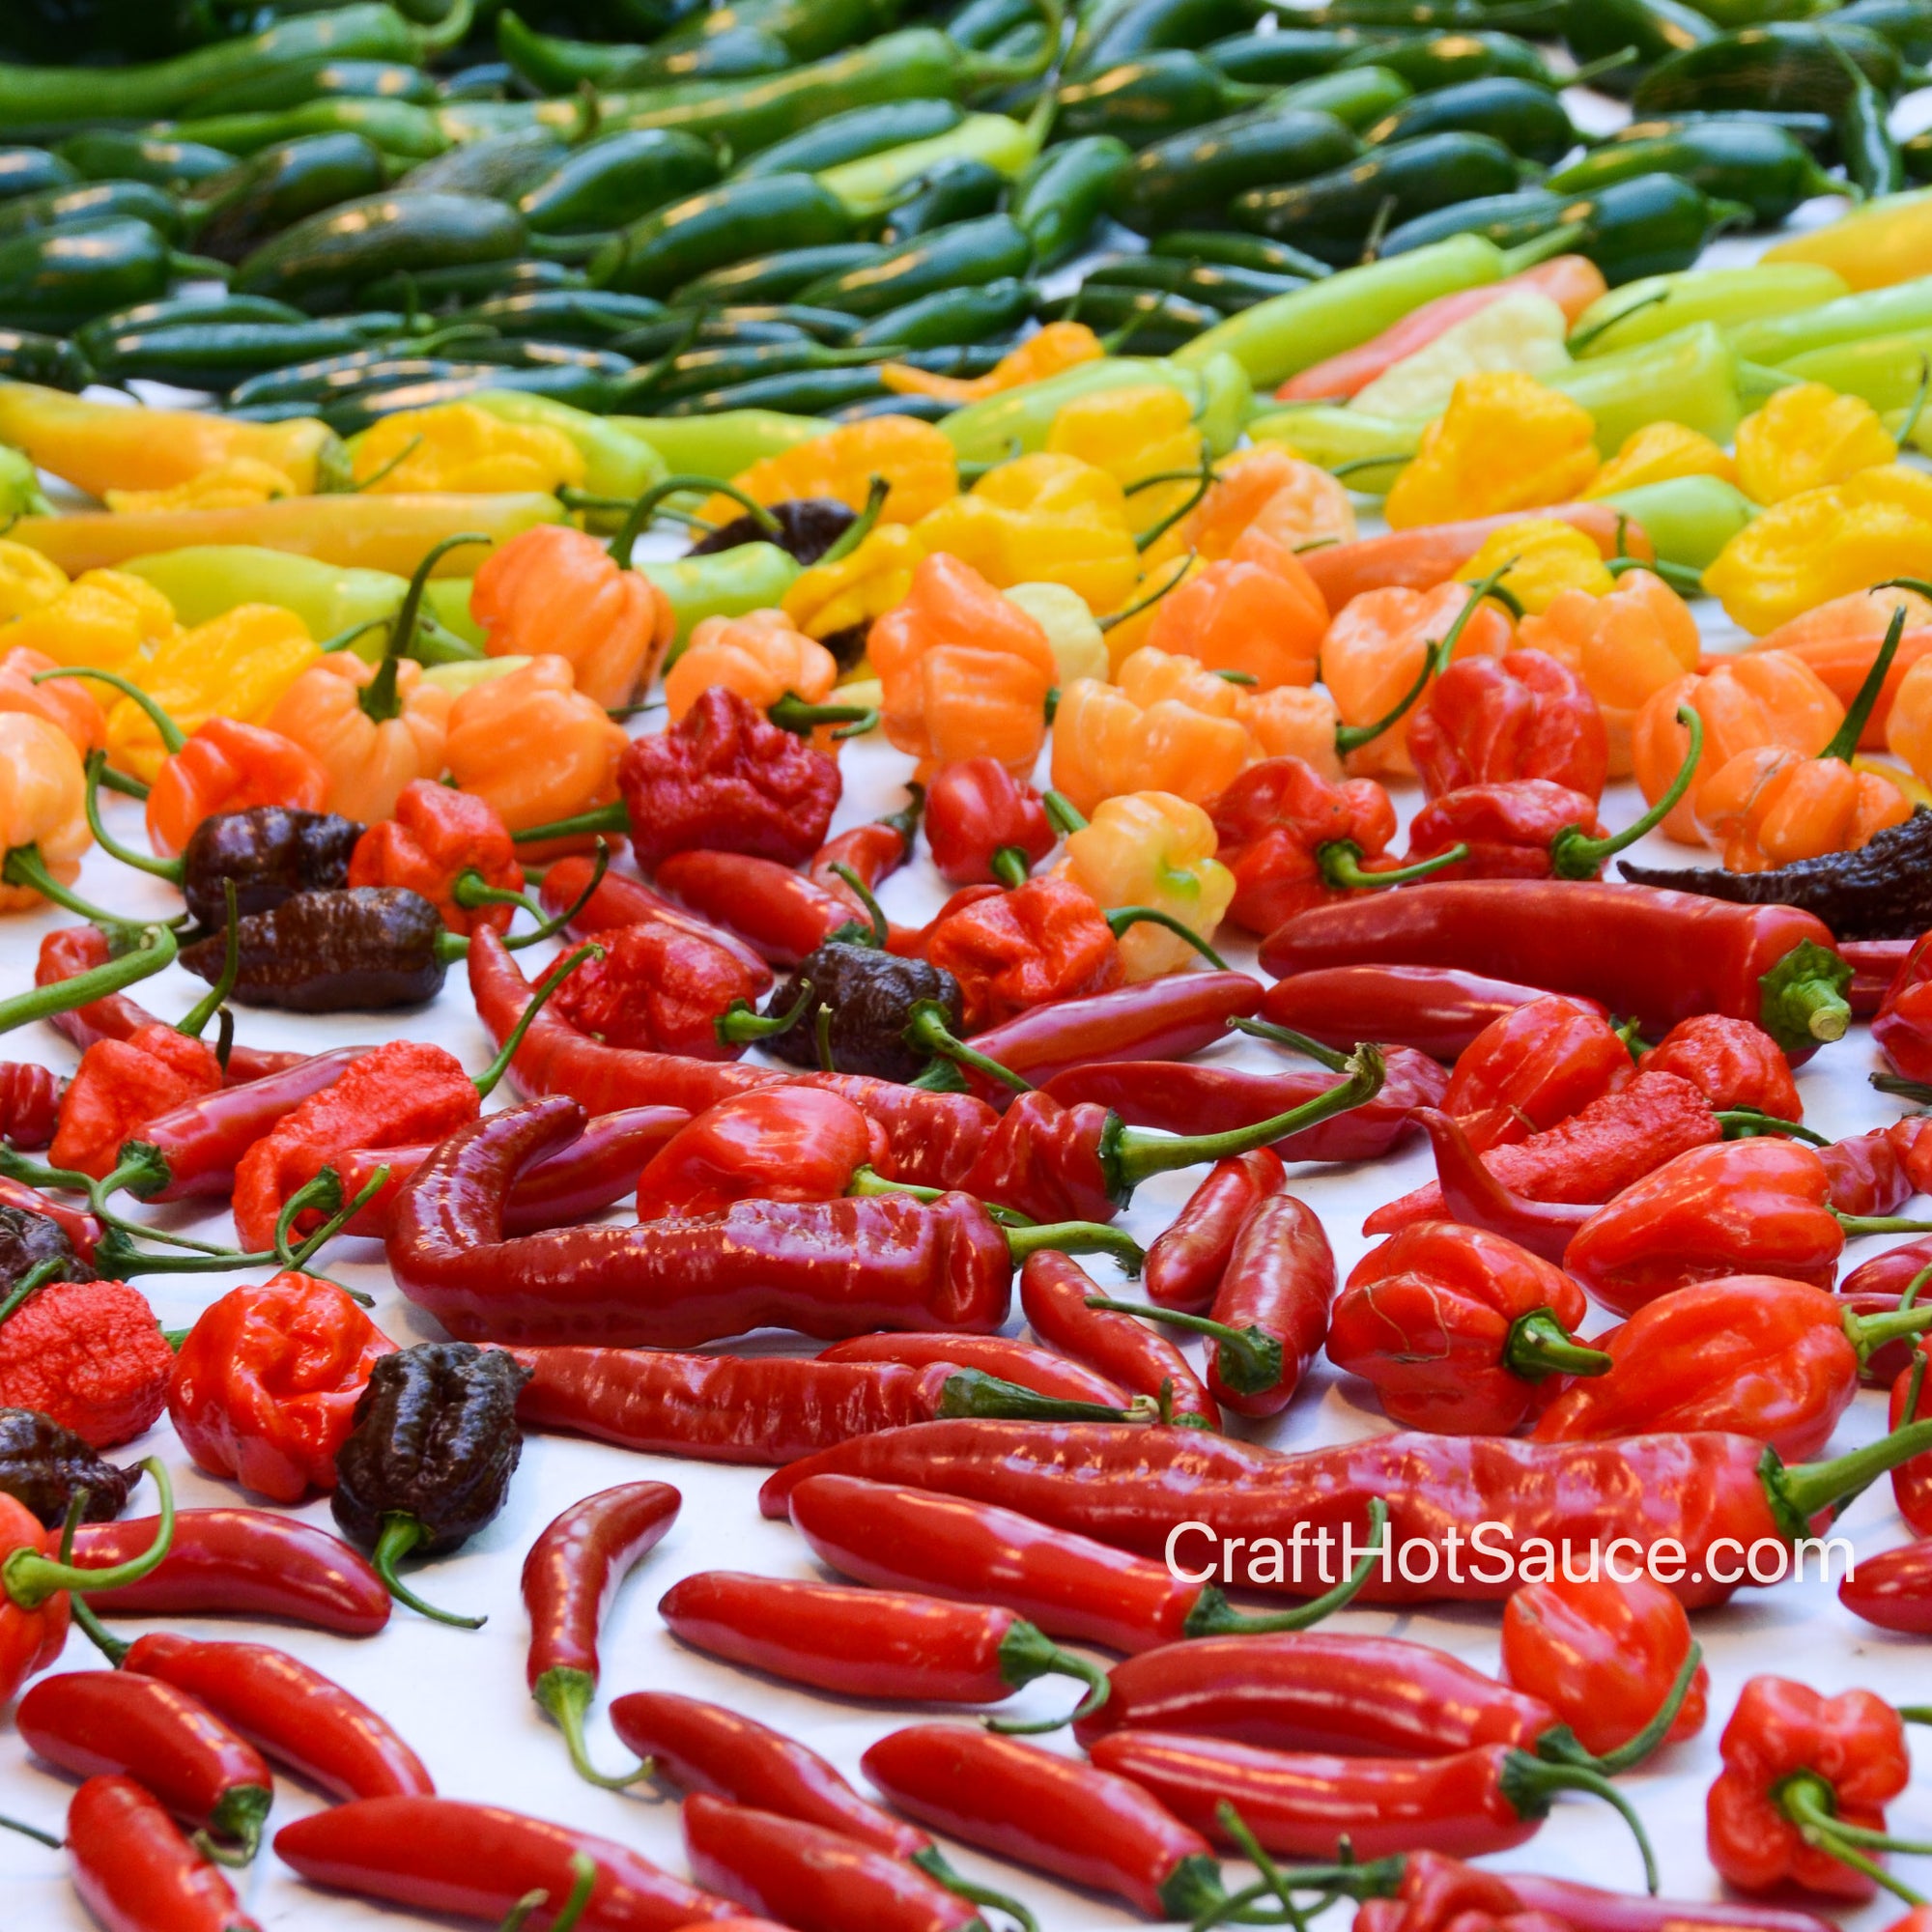 How Hot Are Dried Chile Peppers - Spices Inc.